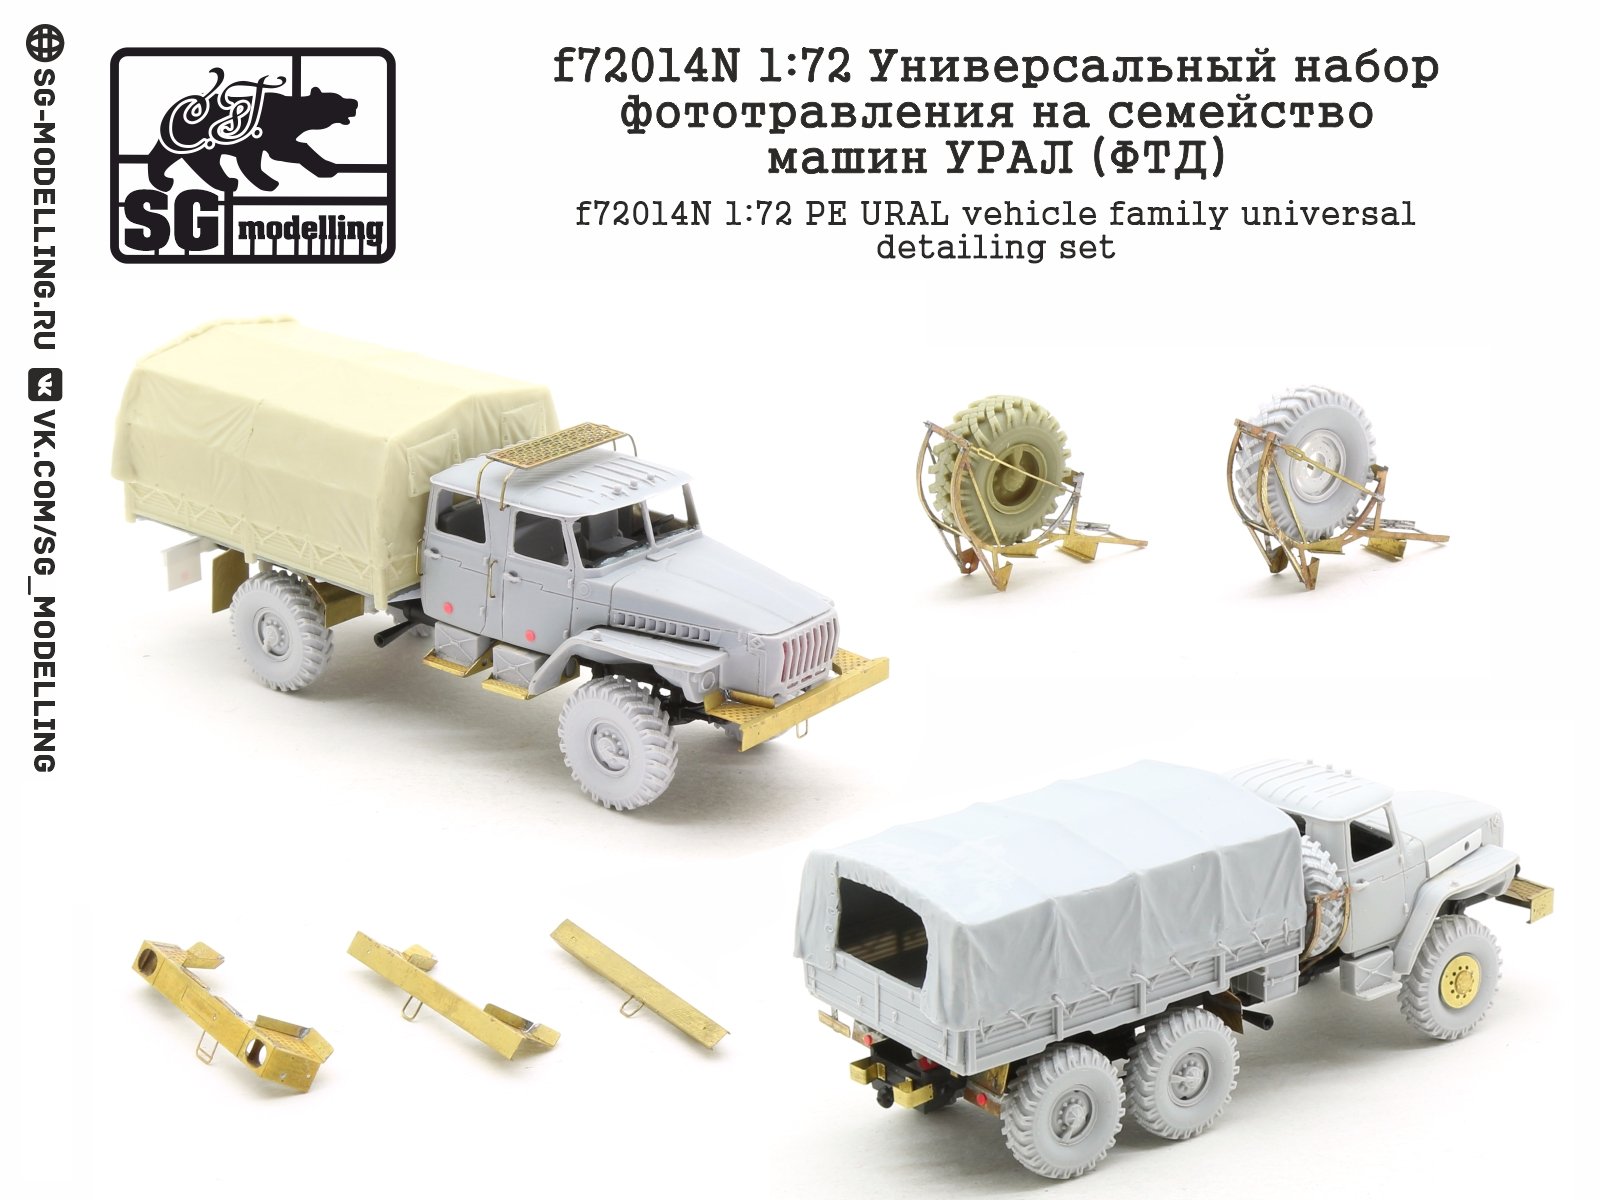 F72014n 1:72 A universal set of photography for the family of cars Ural (FTD) - imodeller.store